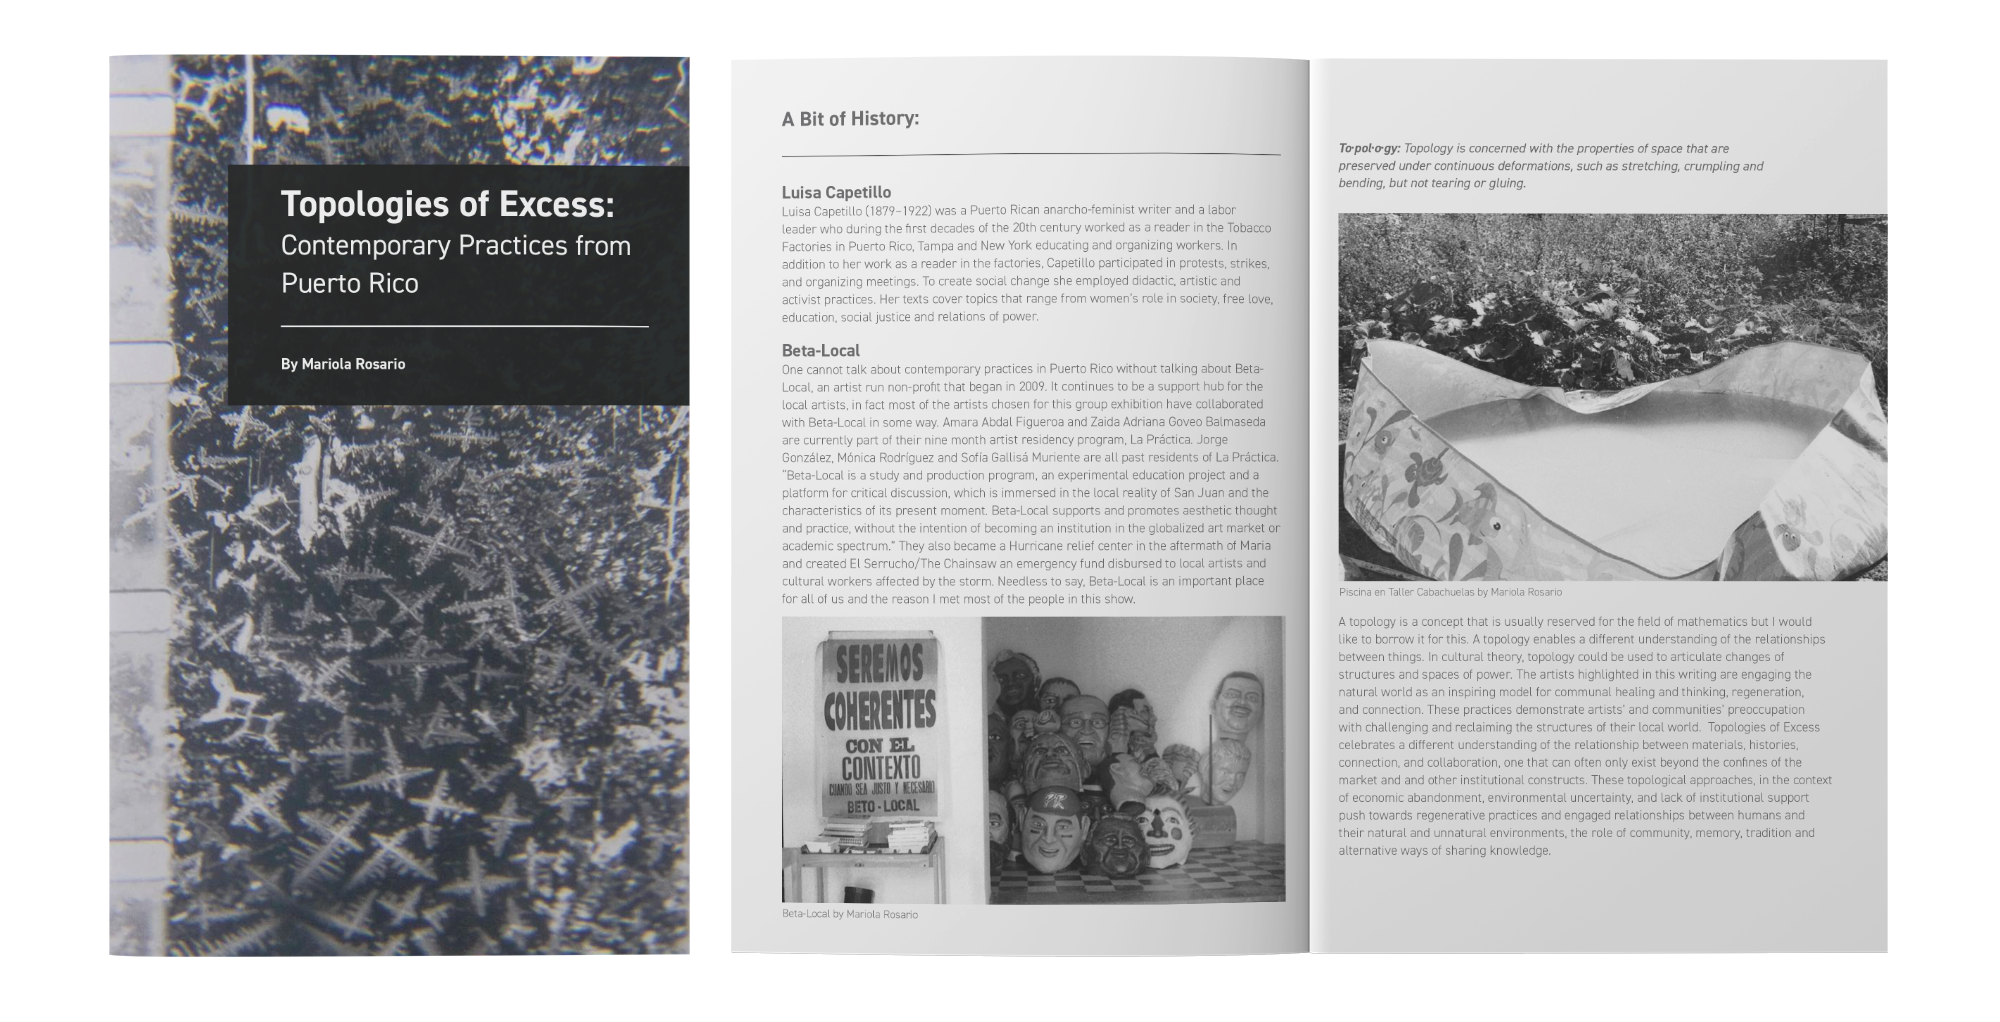  Topologies of Excess exhibit booklet for the Harold J Miossi Art Gallery of Cuesta College 